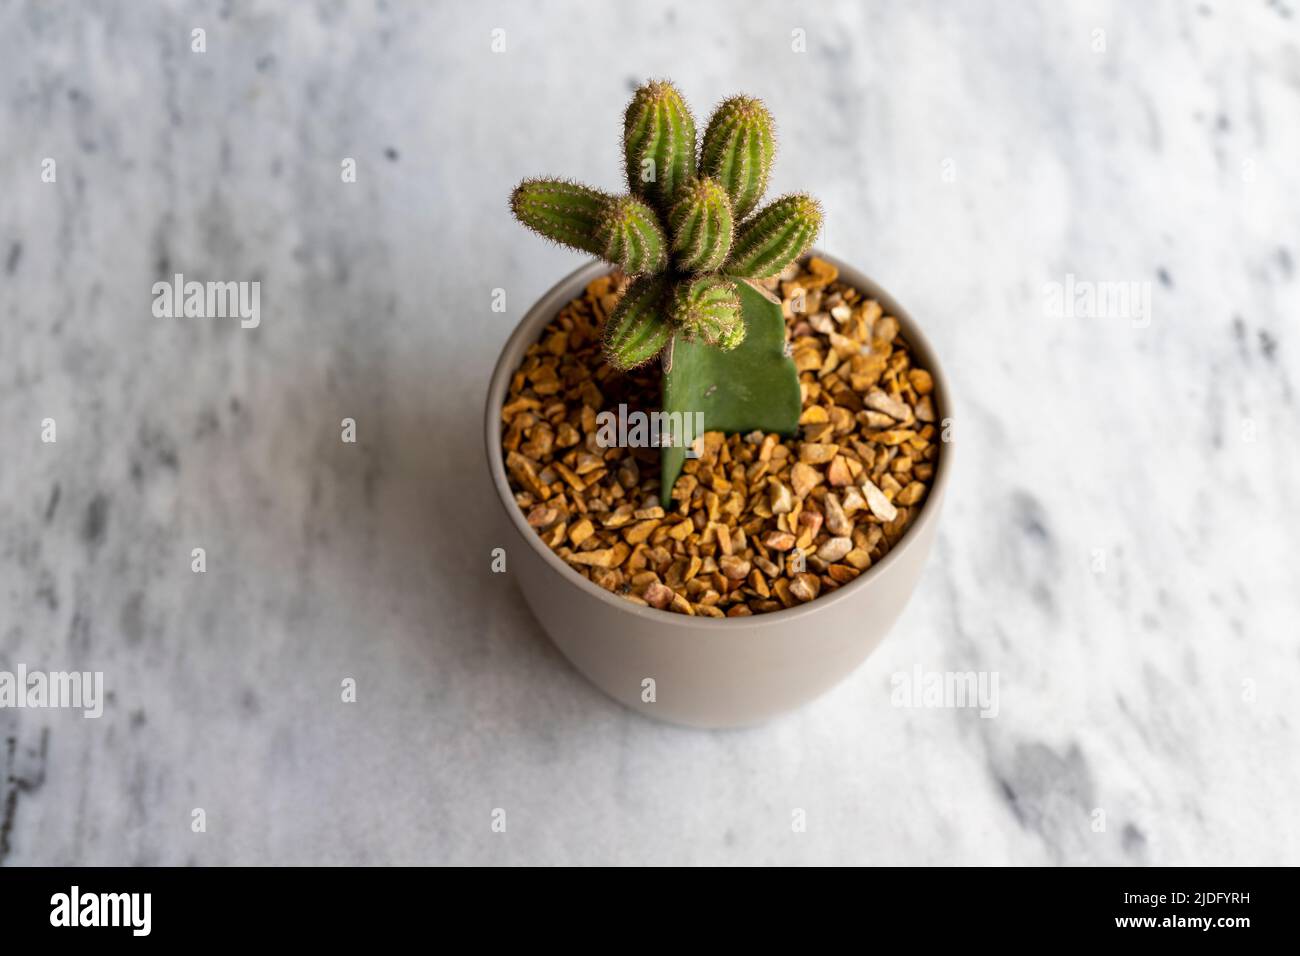 Peanut cactus grafted in a ceramic pot high angle view Stock Photo